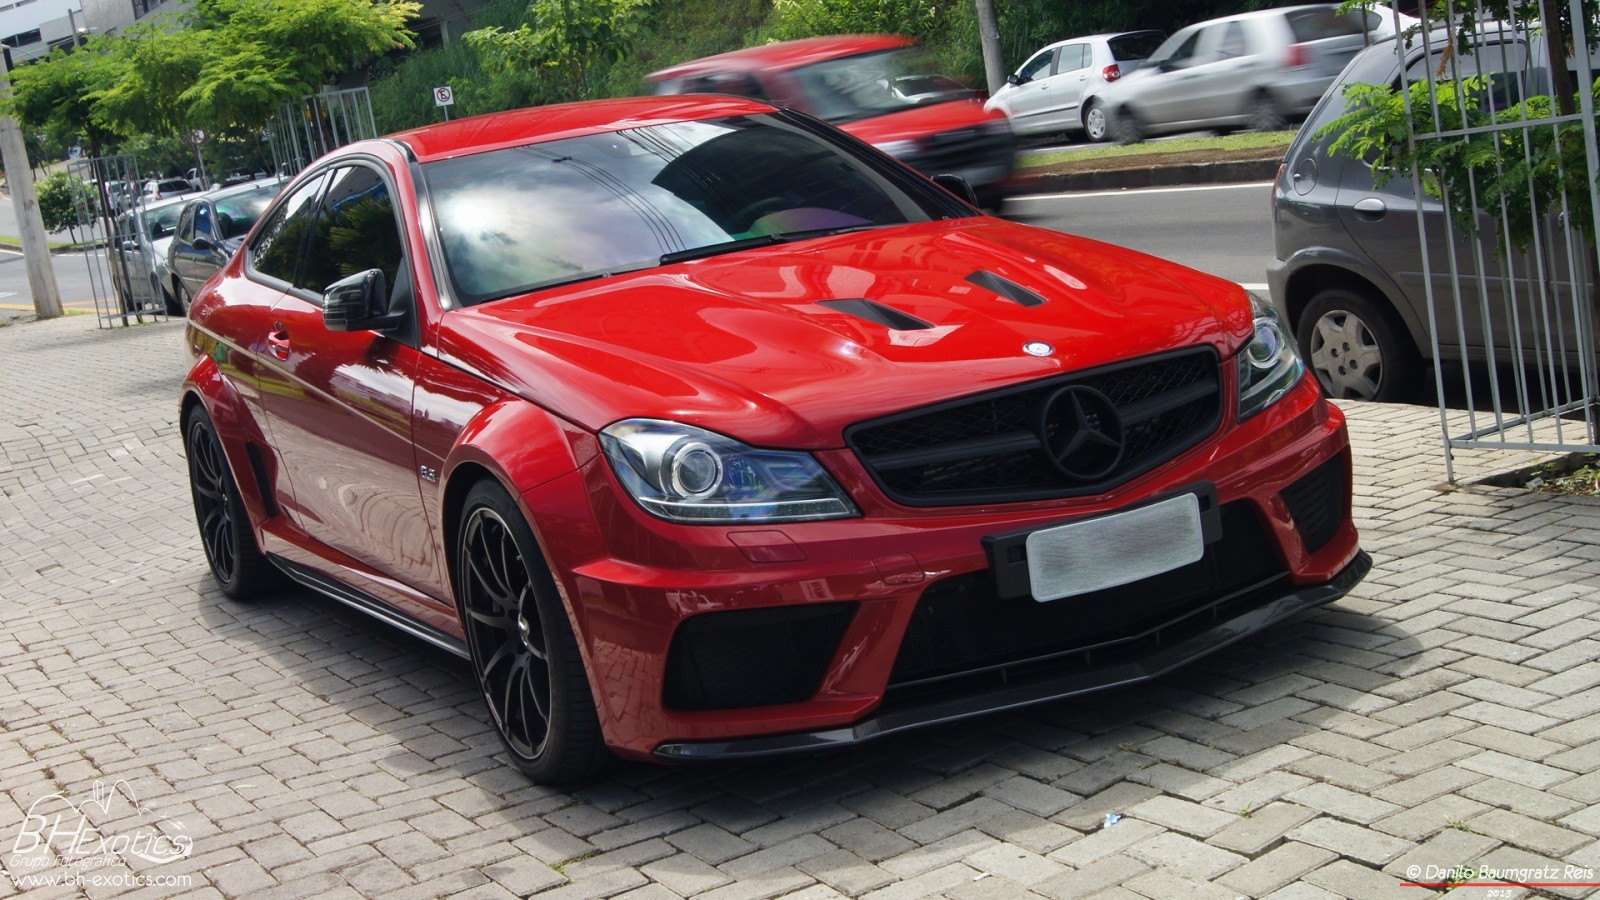 General 1600x900 Mercedes-Benz C63 AMG Mercedes-Benz car vehicle red cars German cars coupe